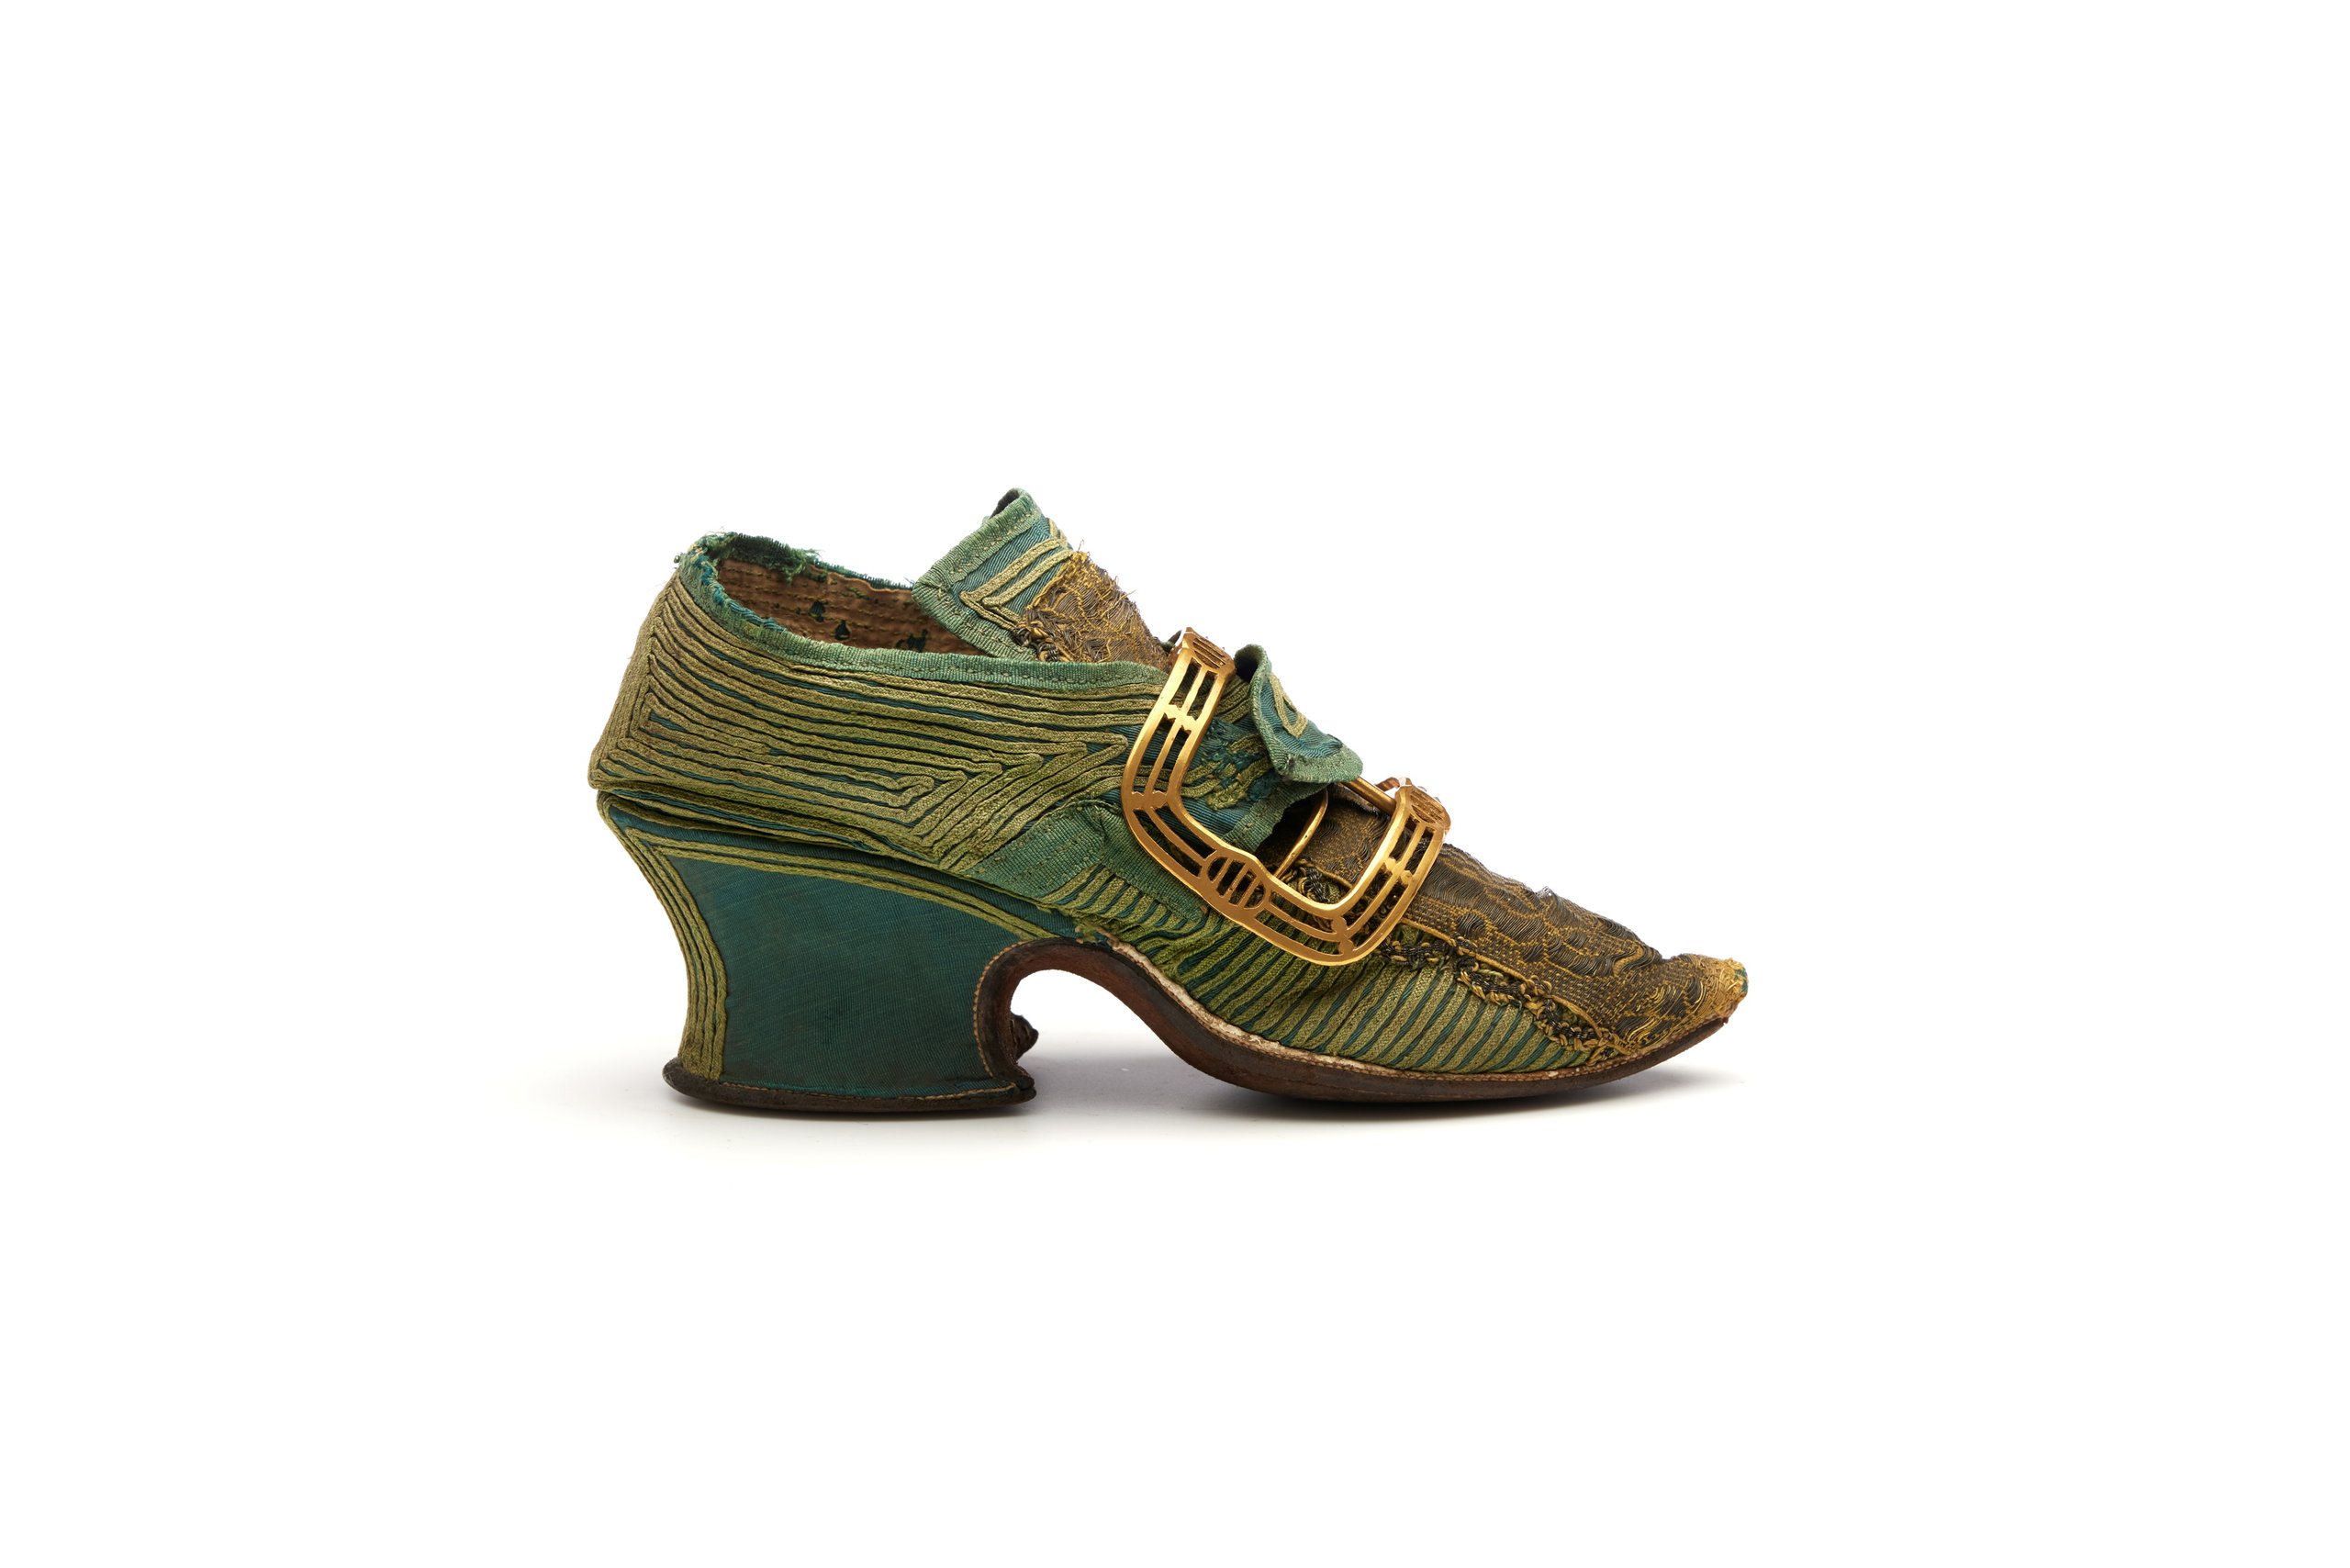 Pair of buckle shoes from the Joseph Box collection